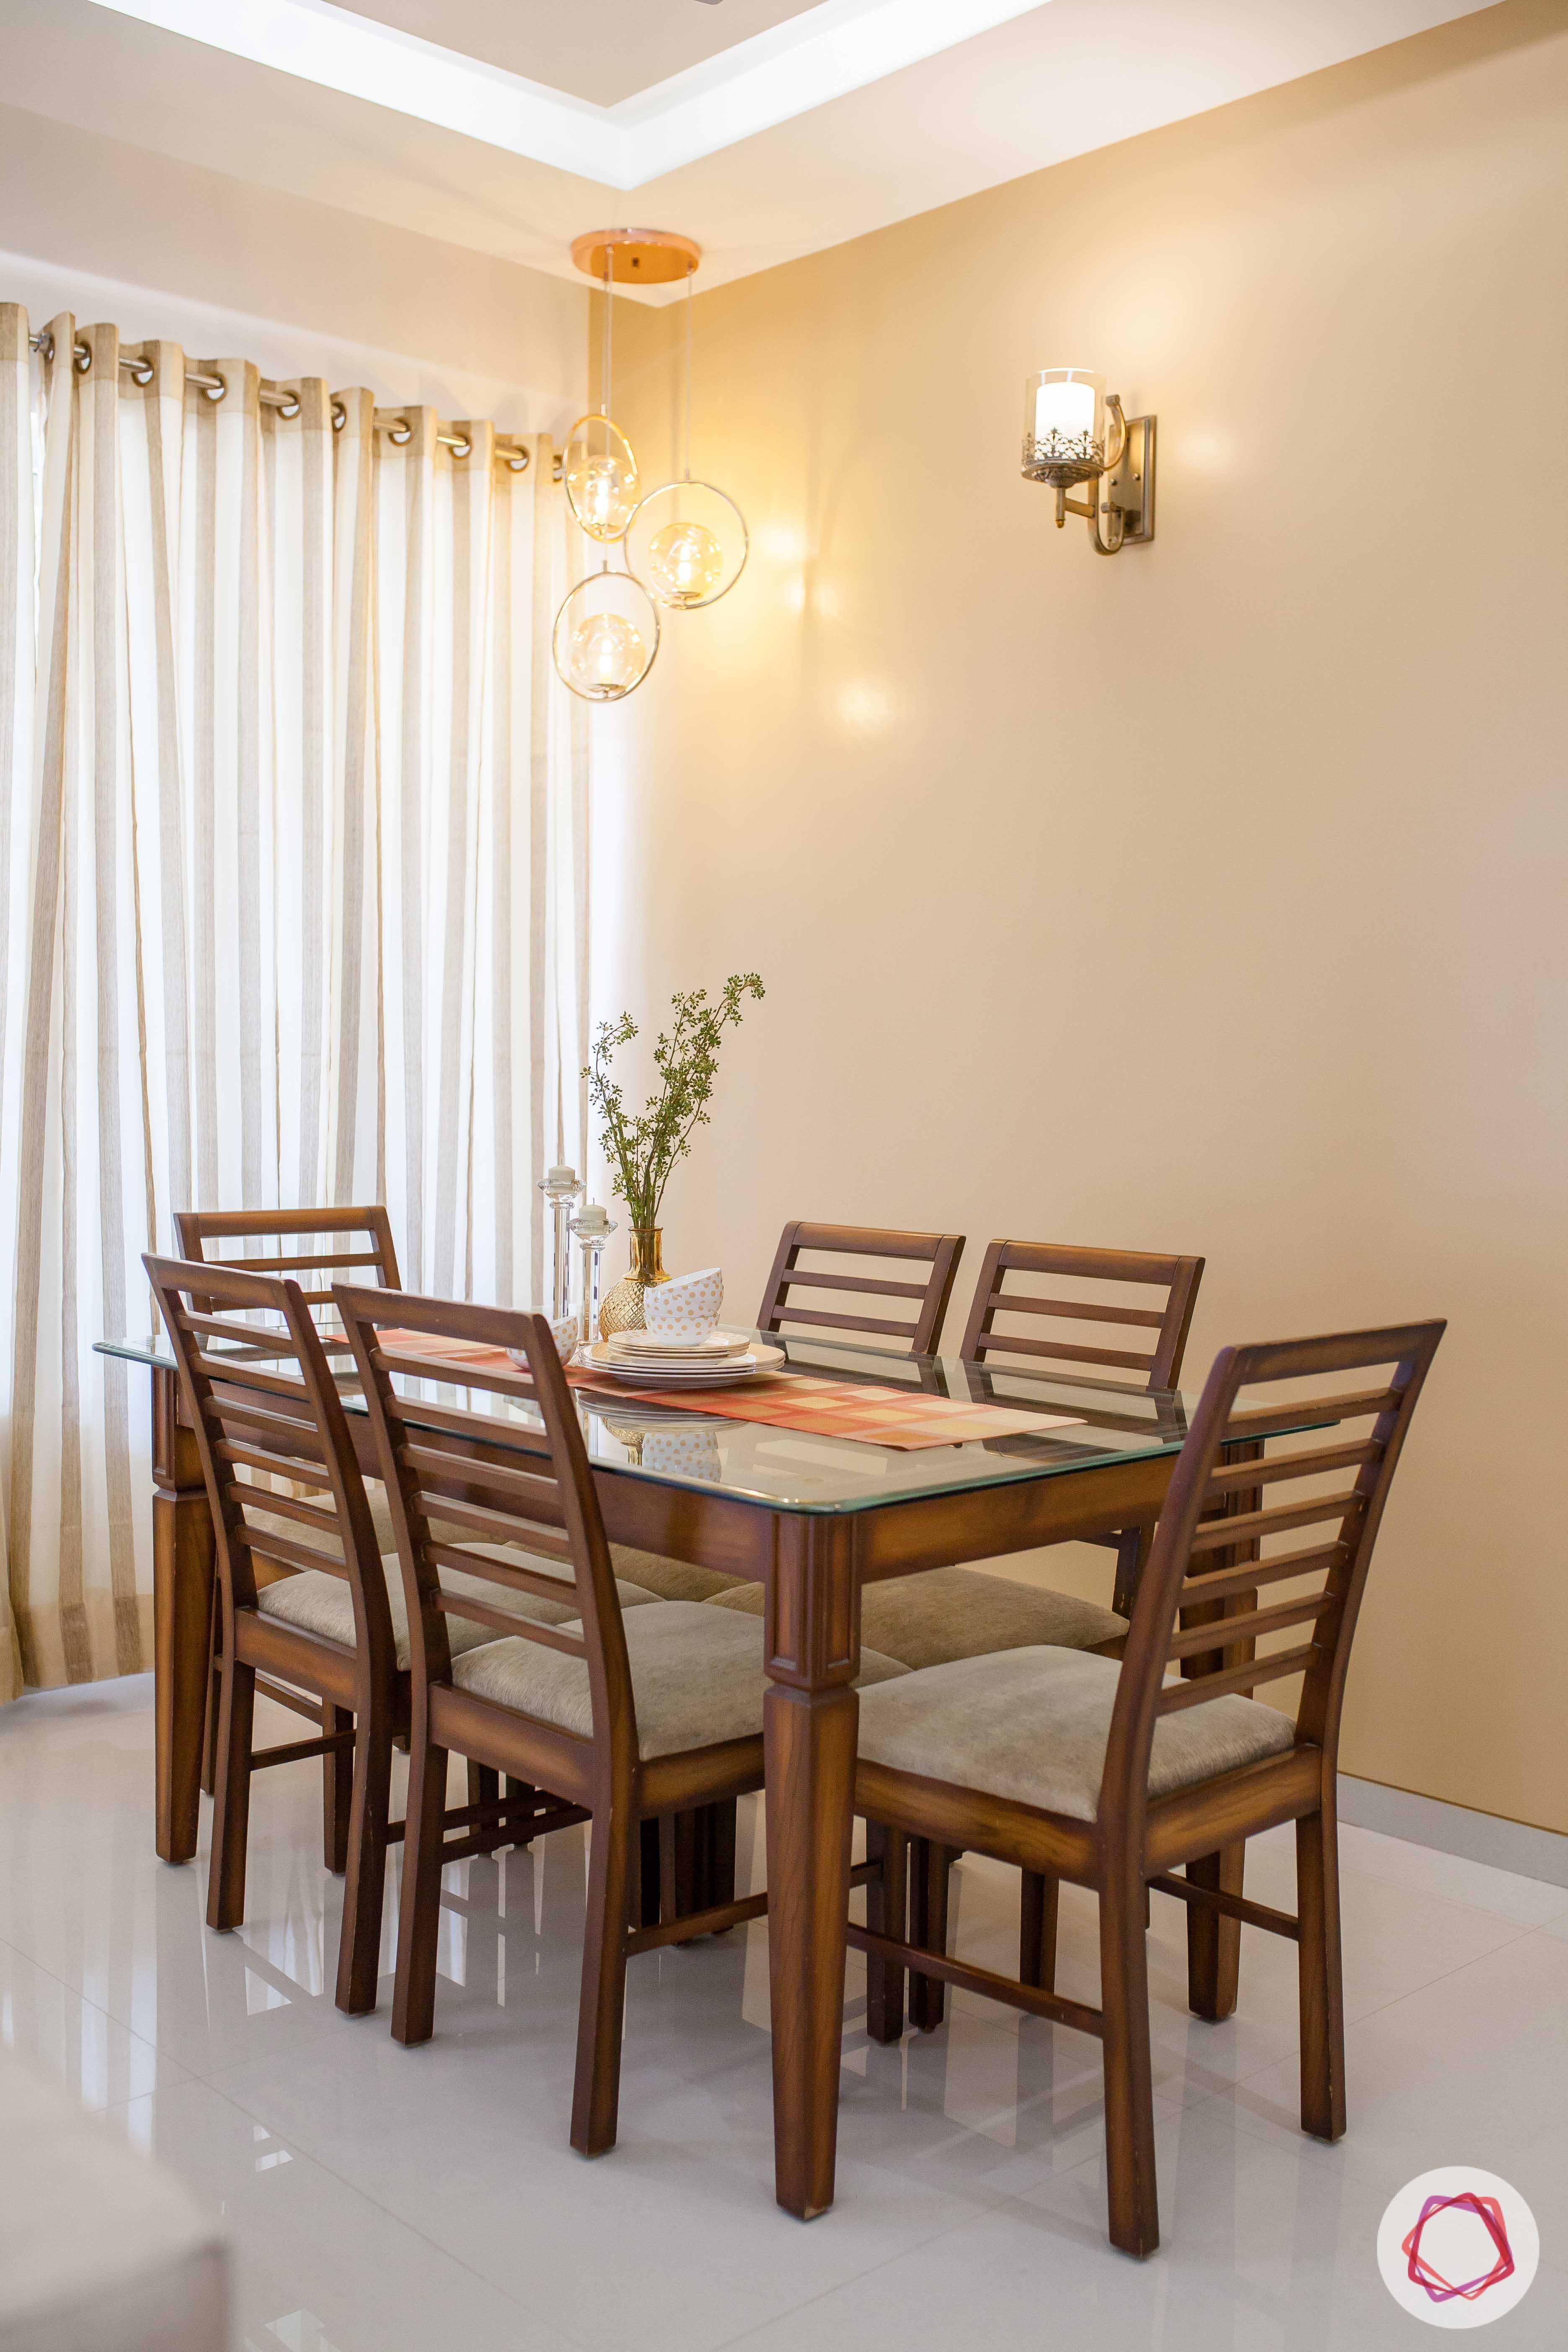 kunal-aspiree-dining-room-wooden-dining-table-dining-chairs